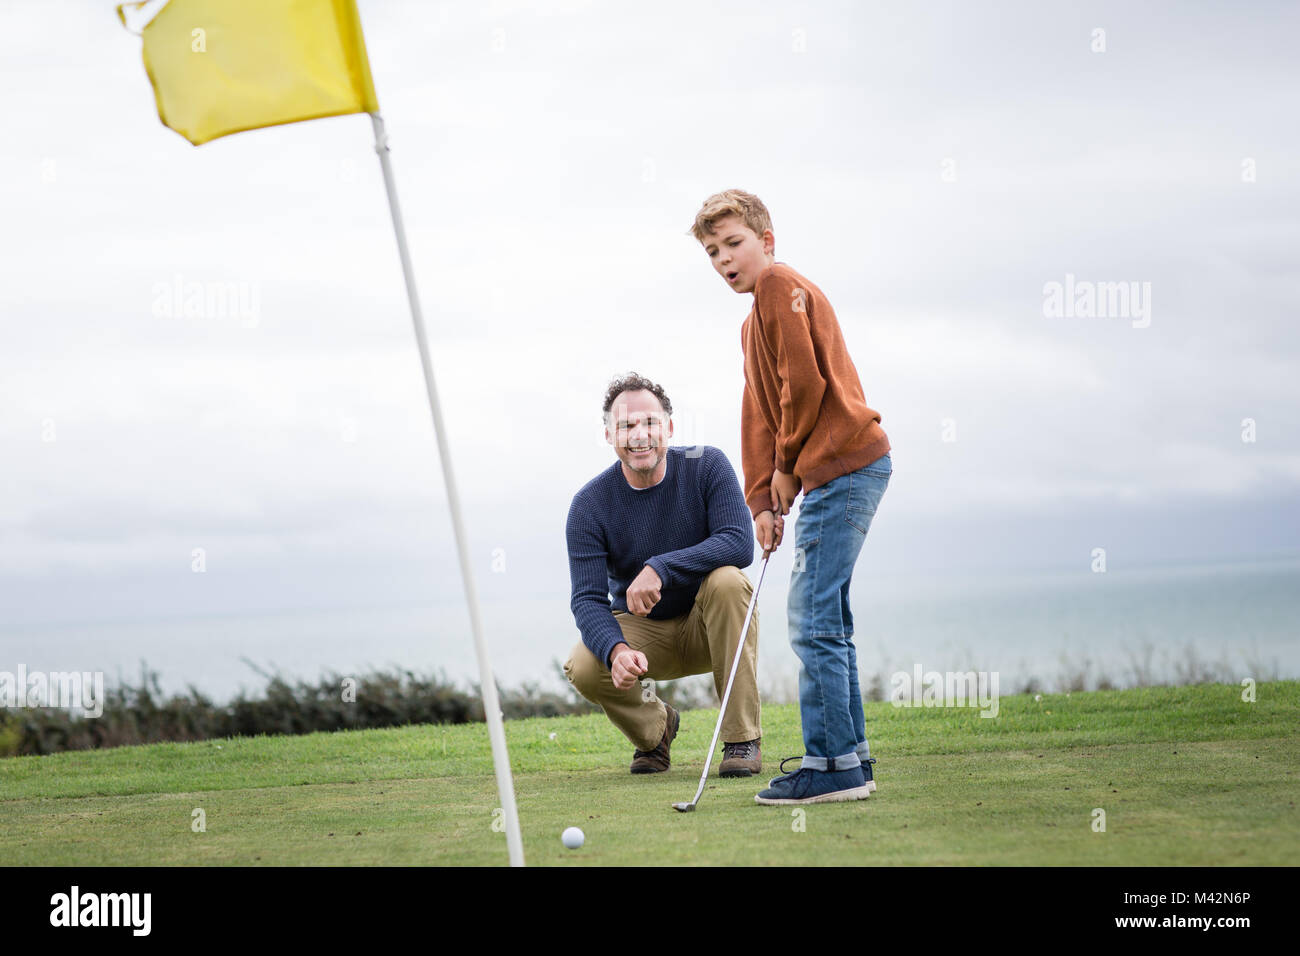 Father watching Son play golf Stock Photo